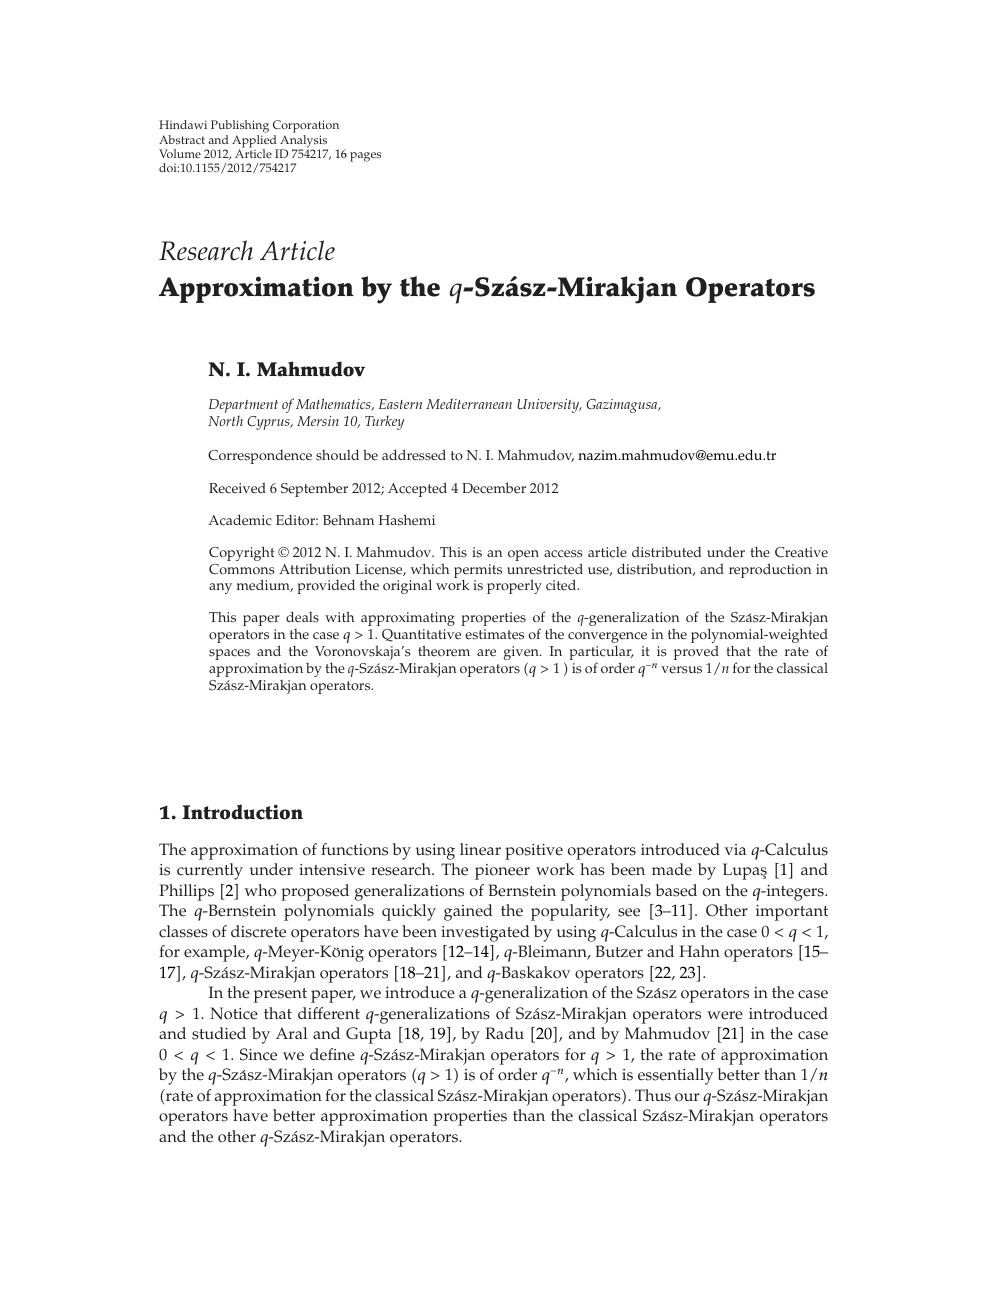 Approximation By The Szasz Mirakjan Operators Topic Of Research Paper In Mathematics Download Scholarly Article Pdf And Read For Free On Cyberleninka Open Science Hub